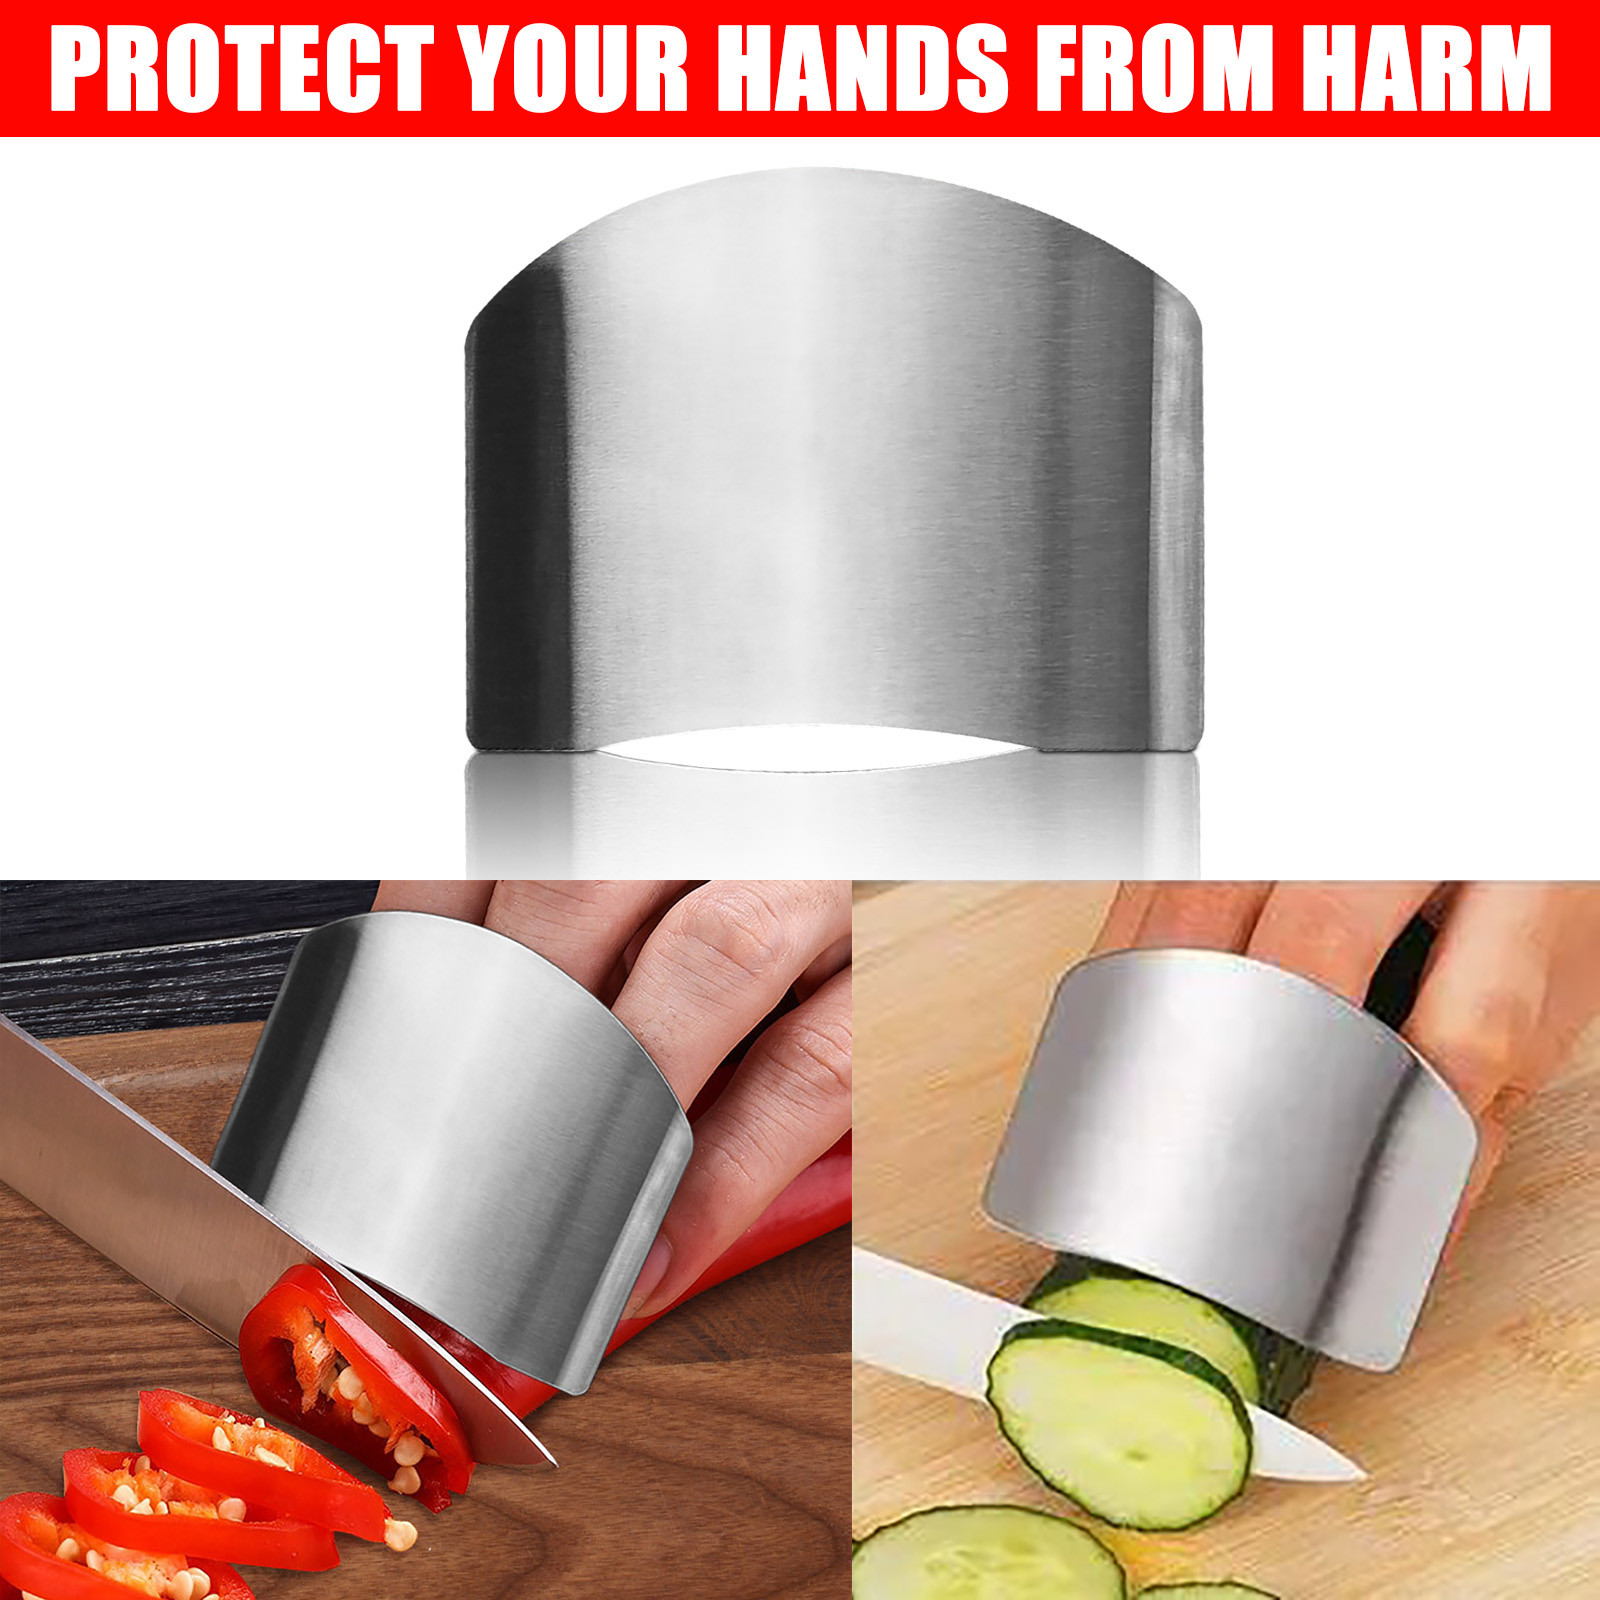 Herrnalise Comforts Home Decor Kitchen Gadgets Stainless Steel Multi-Purpose Anti-Cutting Finger Guard - image 3 of 9